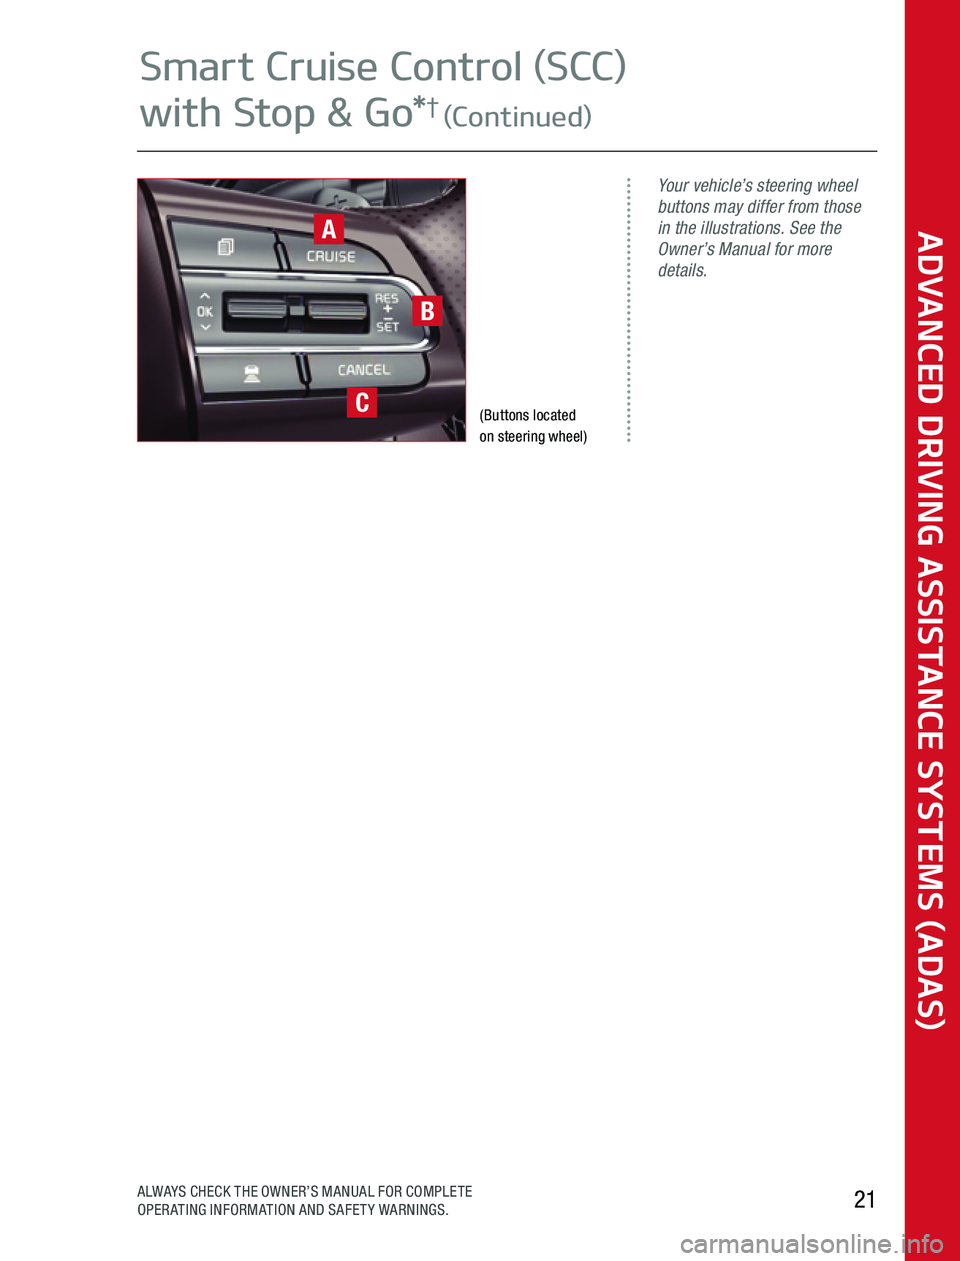 KIA OPTIMA 2020  Advanced Driving Assistance System (Buttons located  on steering wheel)
Your vehicle’s steering wheel buttons may differ from those in the illustrations. See the Owner’s Manual for more details.
21ALWAYS CHECK THE OWNER’S MANUAL 